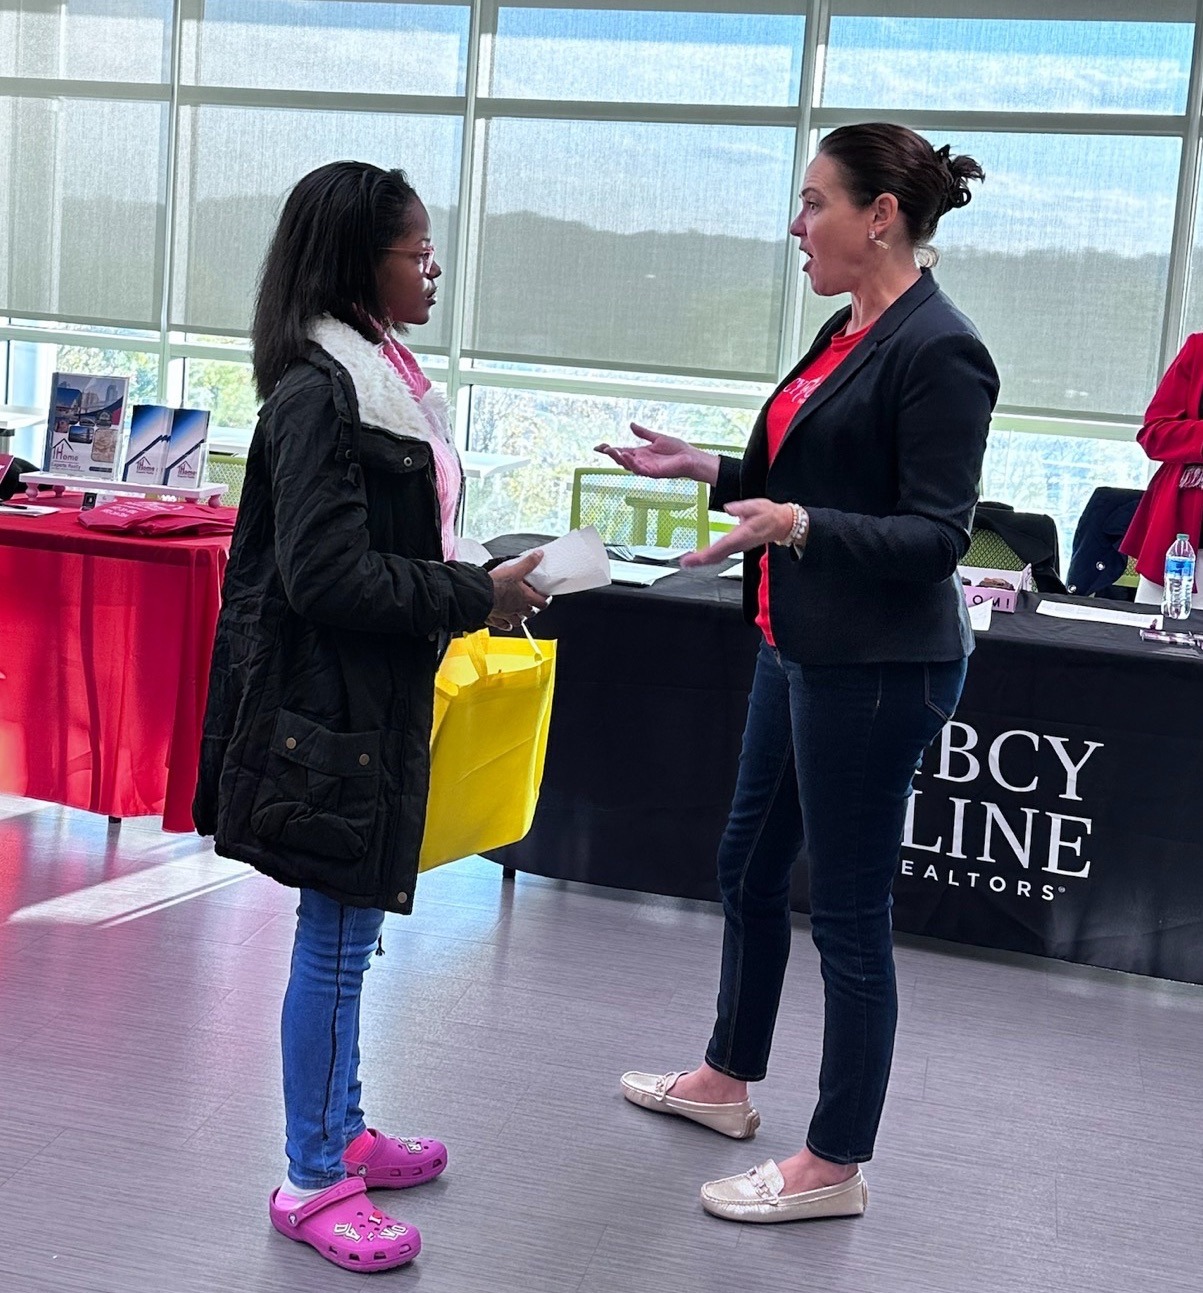 Student talks to a professional at the Real Estate event